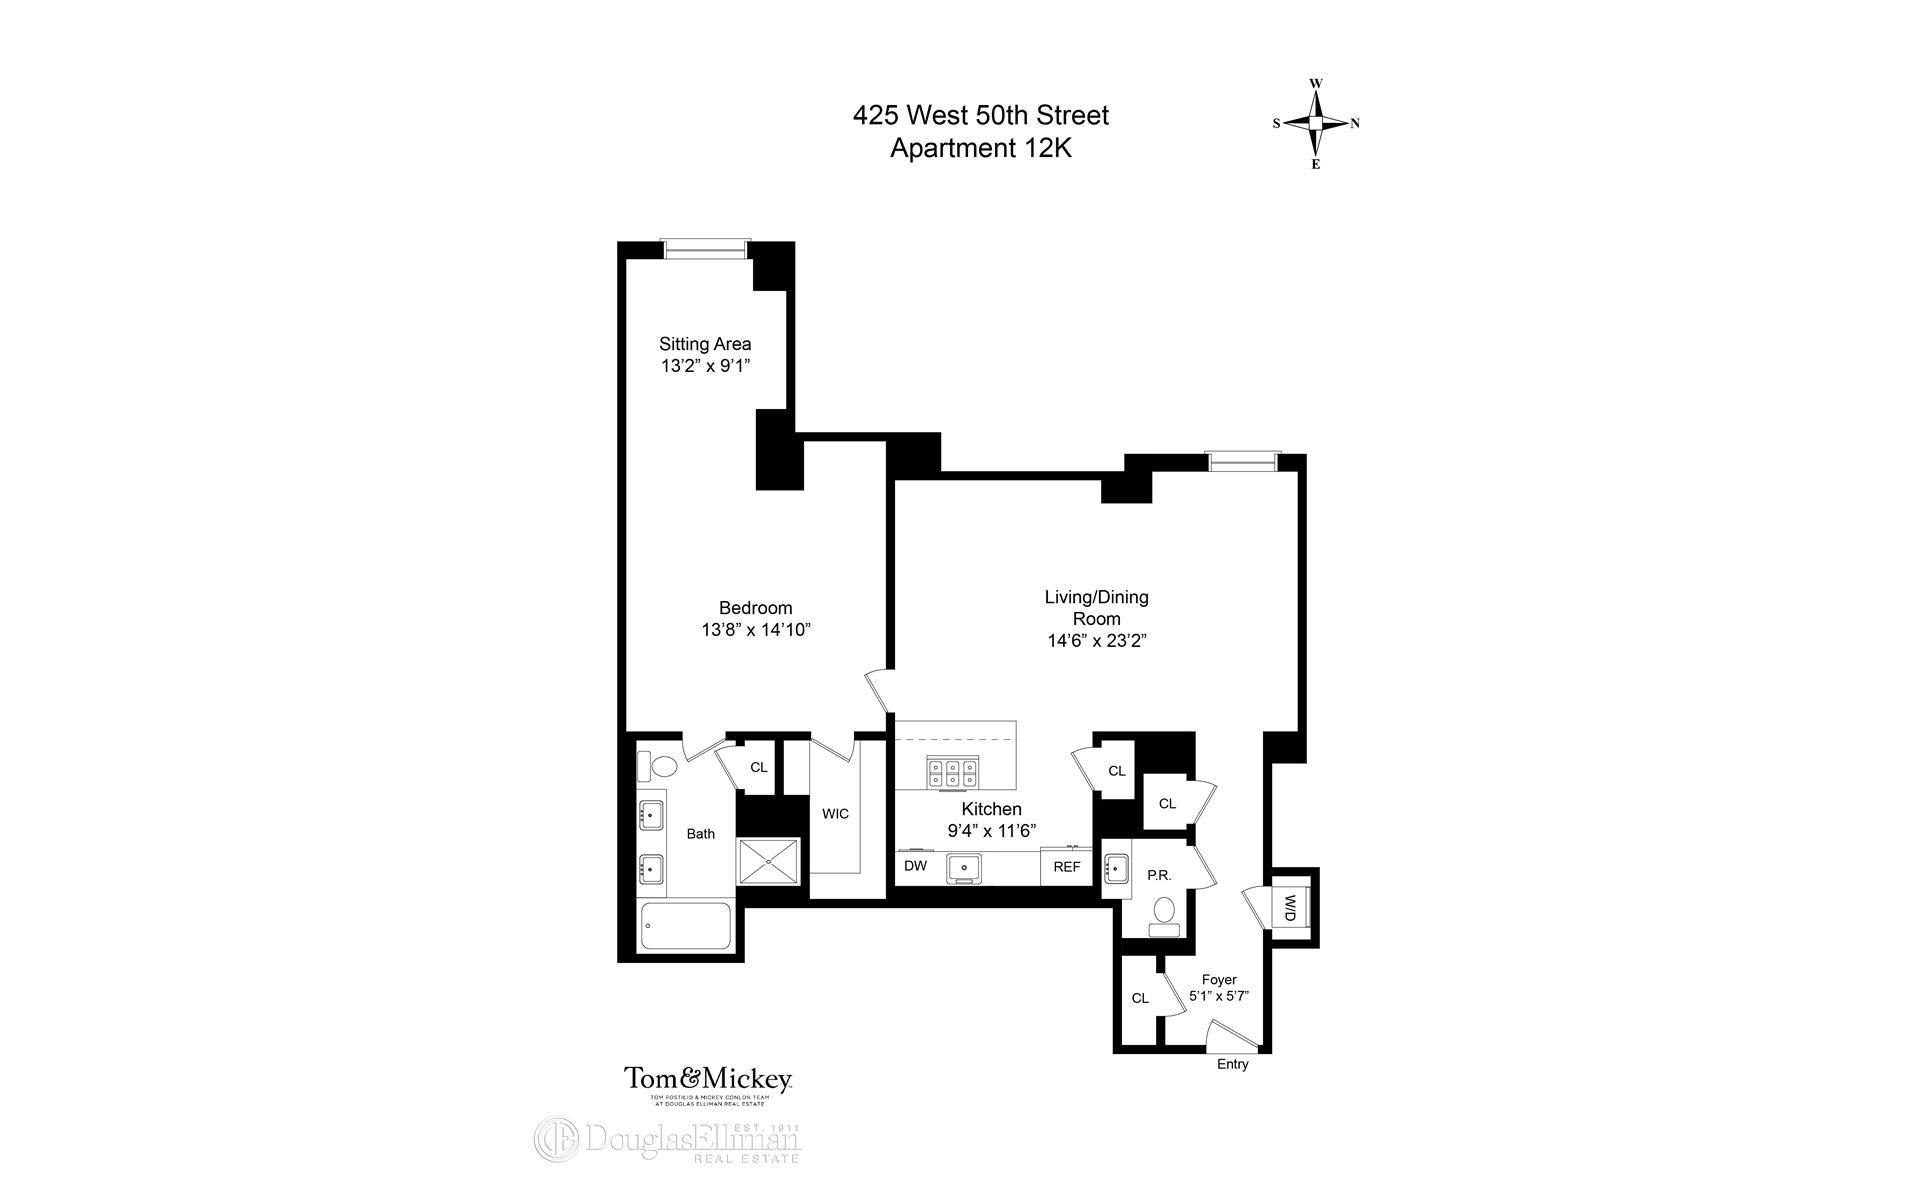 The largest one bedroom home at Stella Tower, this 1, 235 square foot home features high ceilings in a gracious layout with one and a half baths.